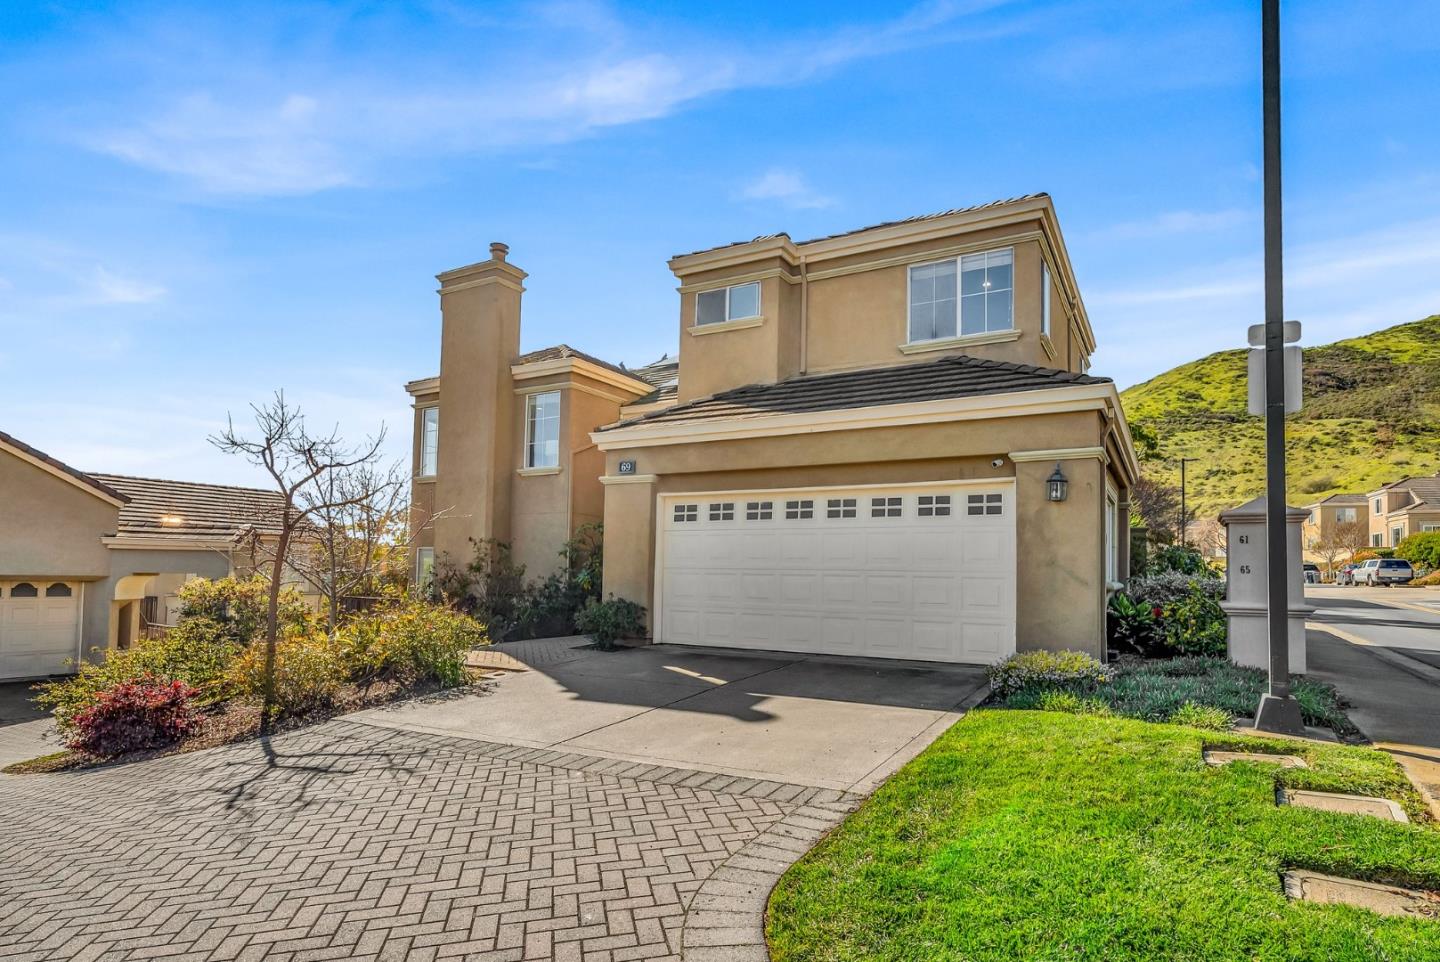 Photo of 69 Parkgrove Dr in South San Francisco, CA